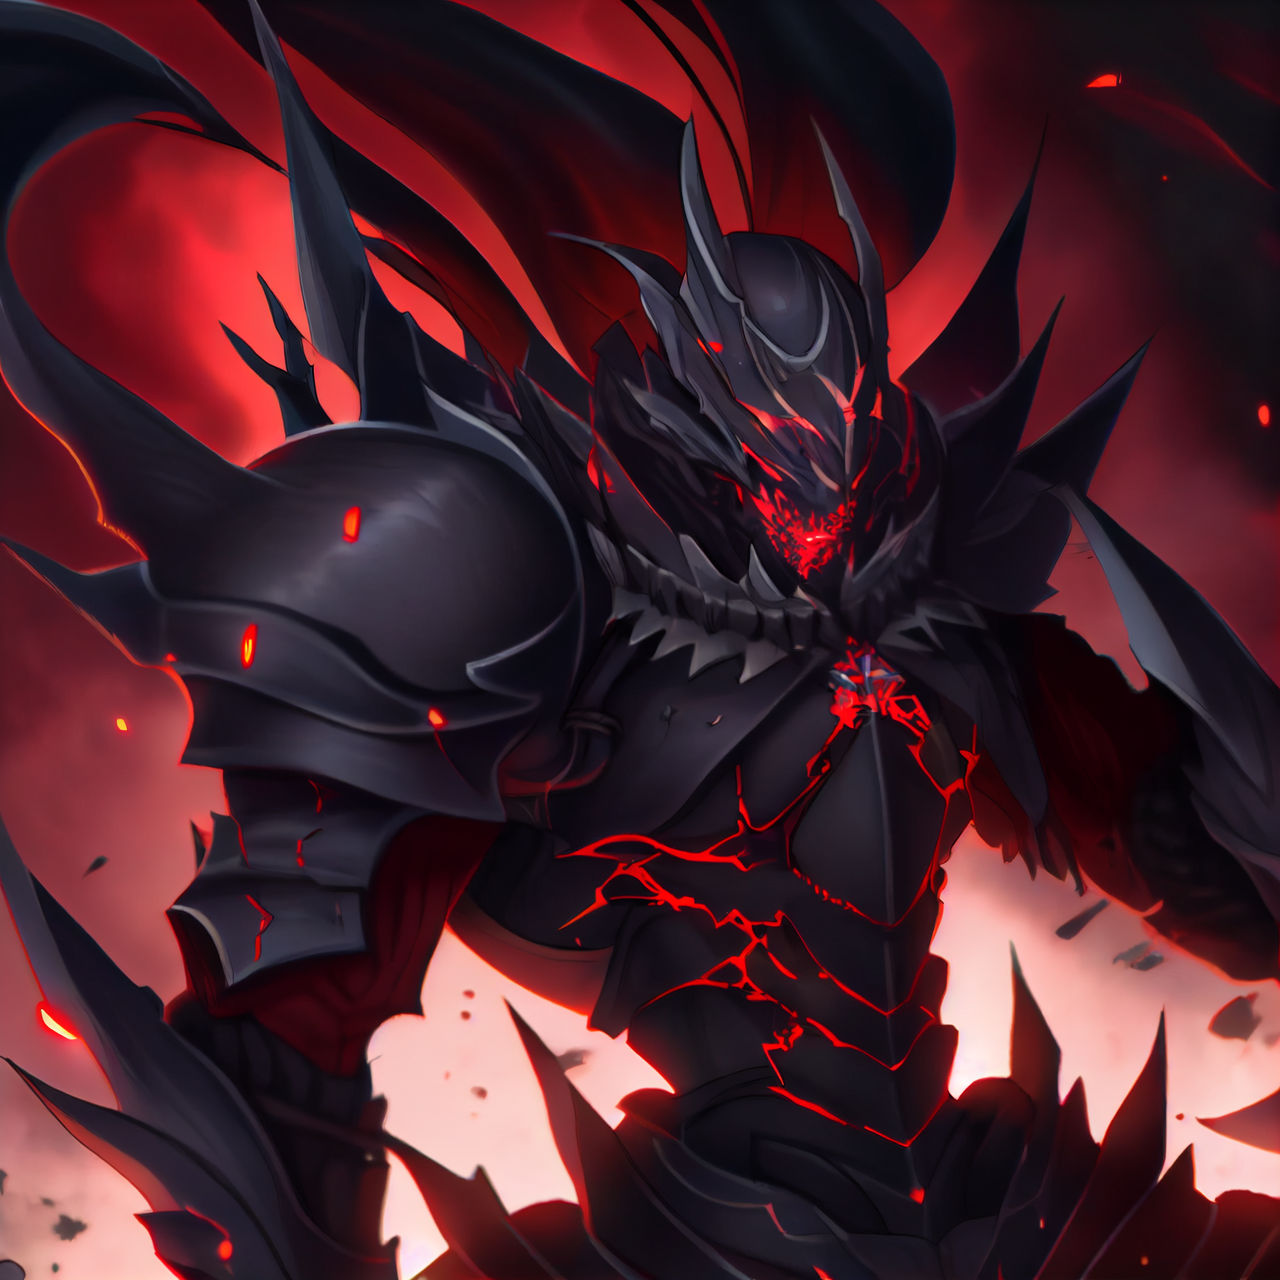 The Infernal Knight by BoneHedToons on DeviantArt